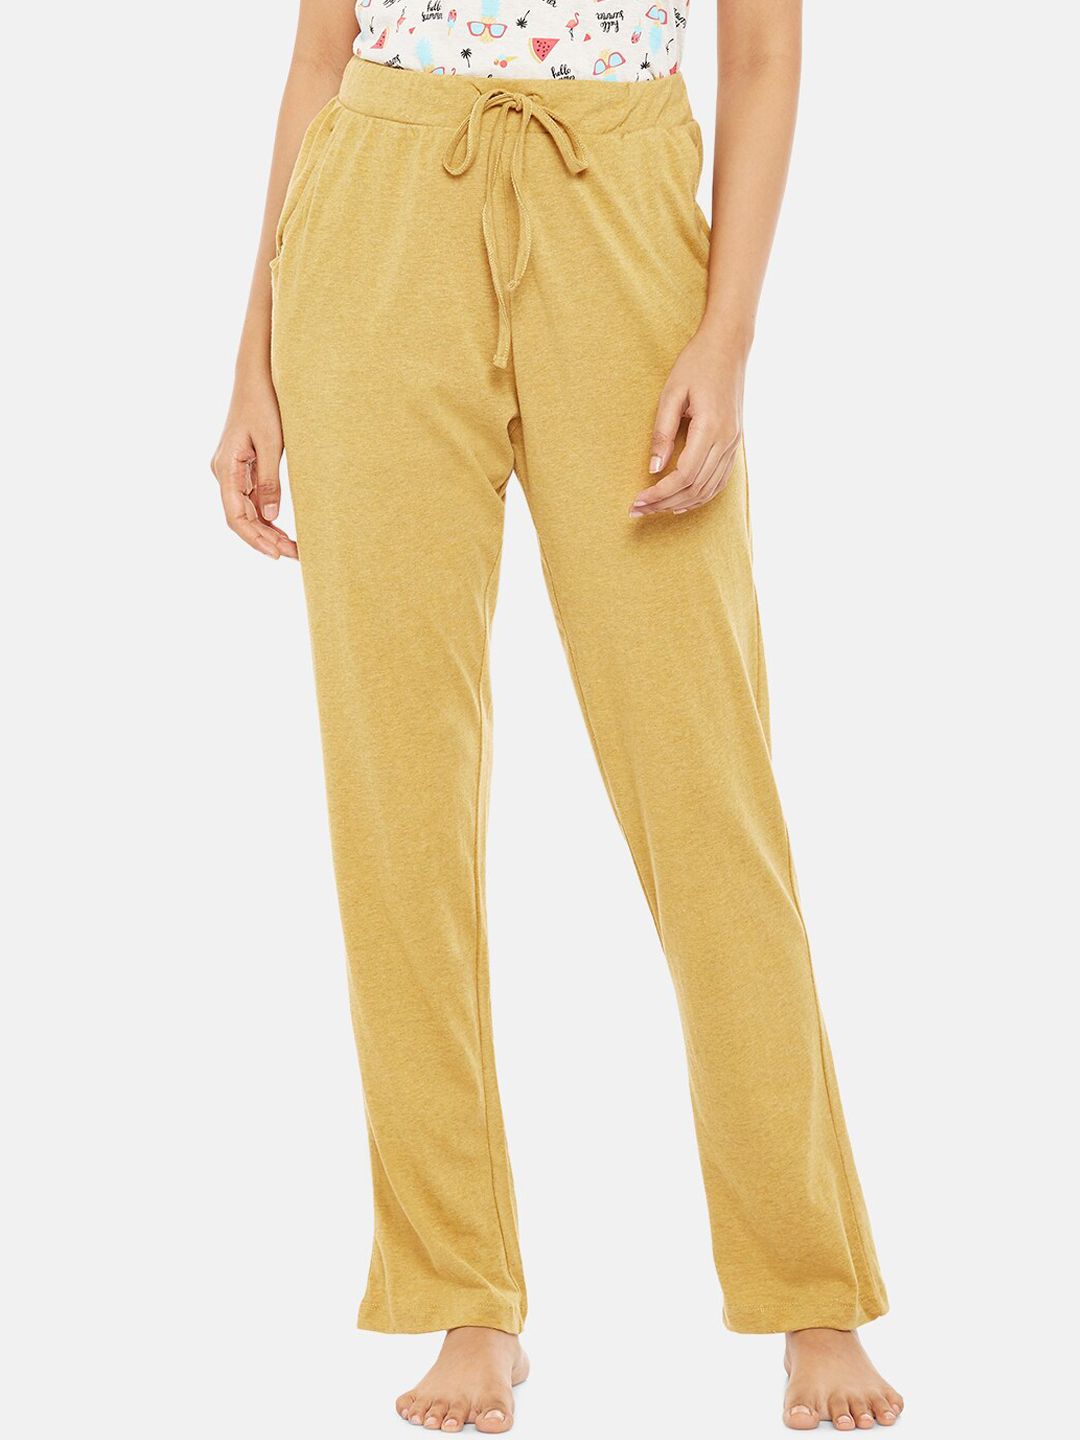 Dreamz by Pantaloons Women Yellow Cotton Lounge Pants Price in India